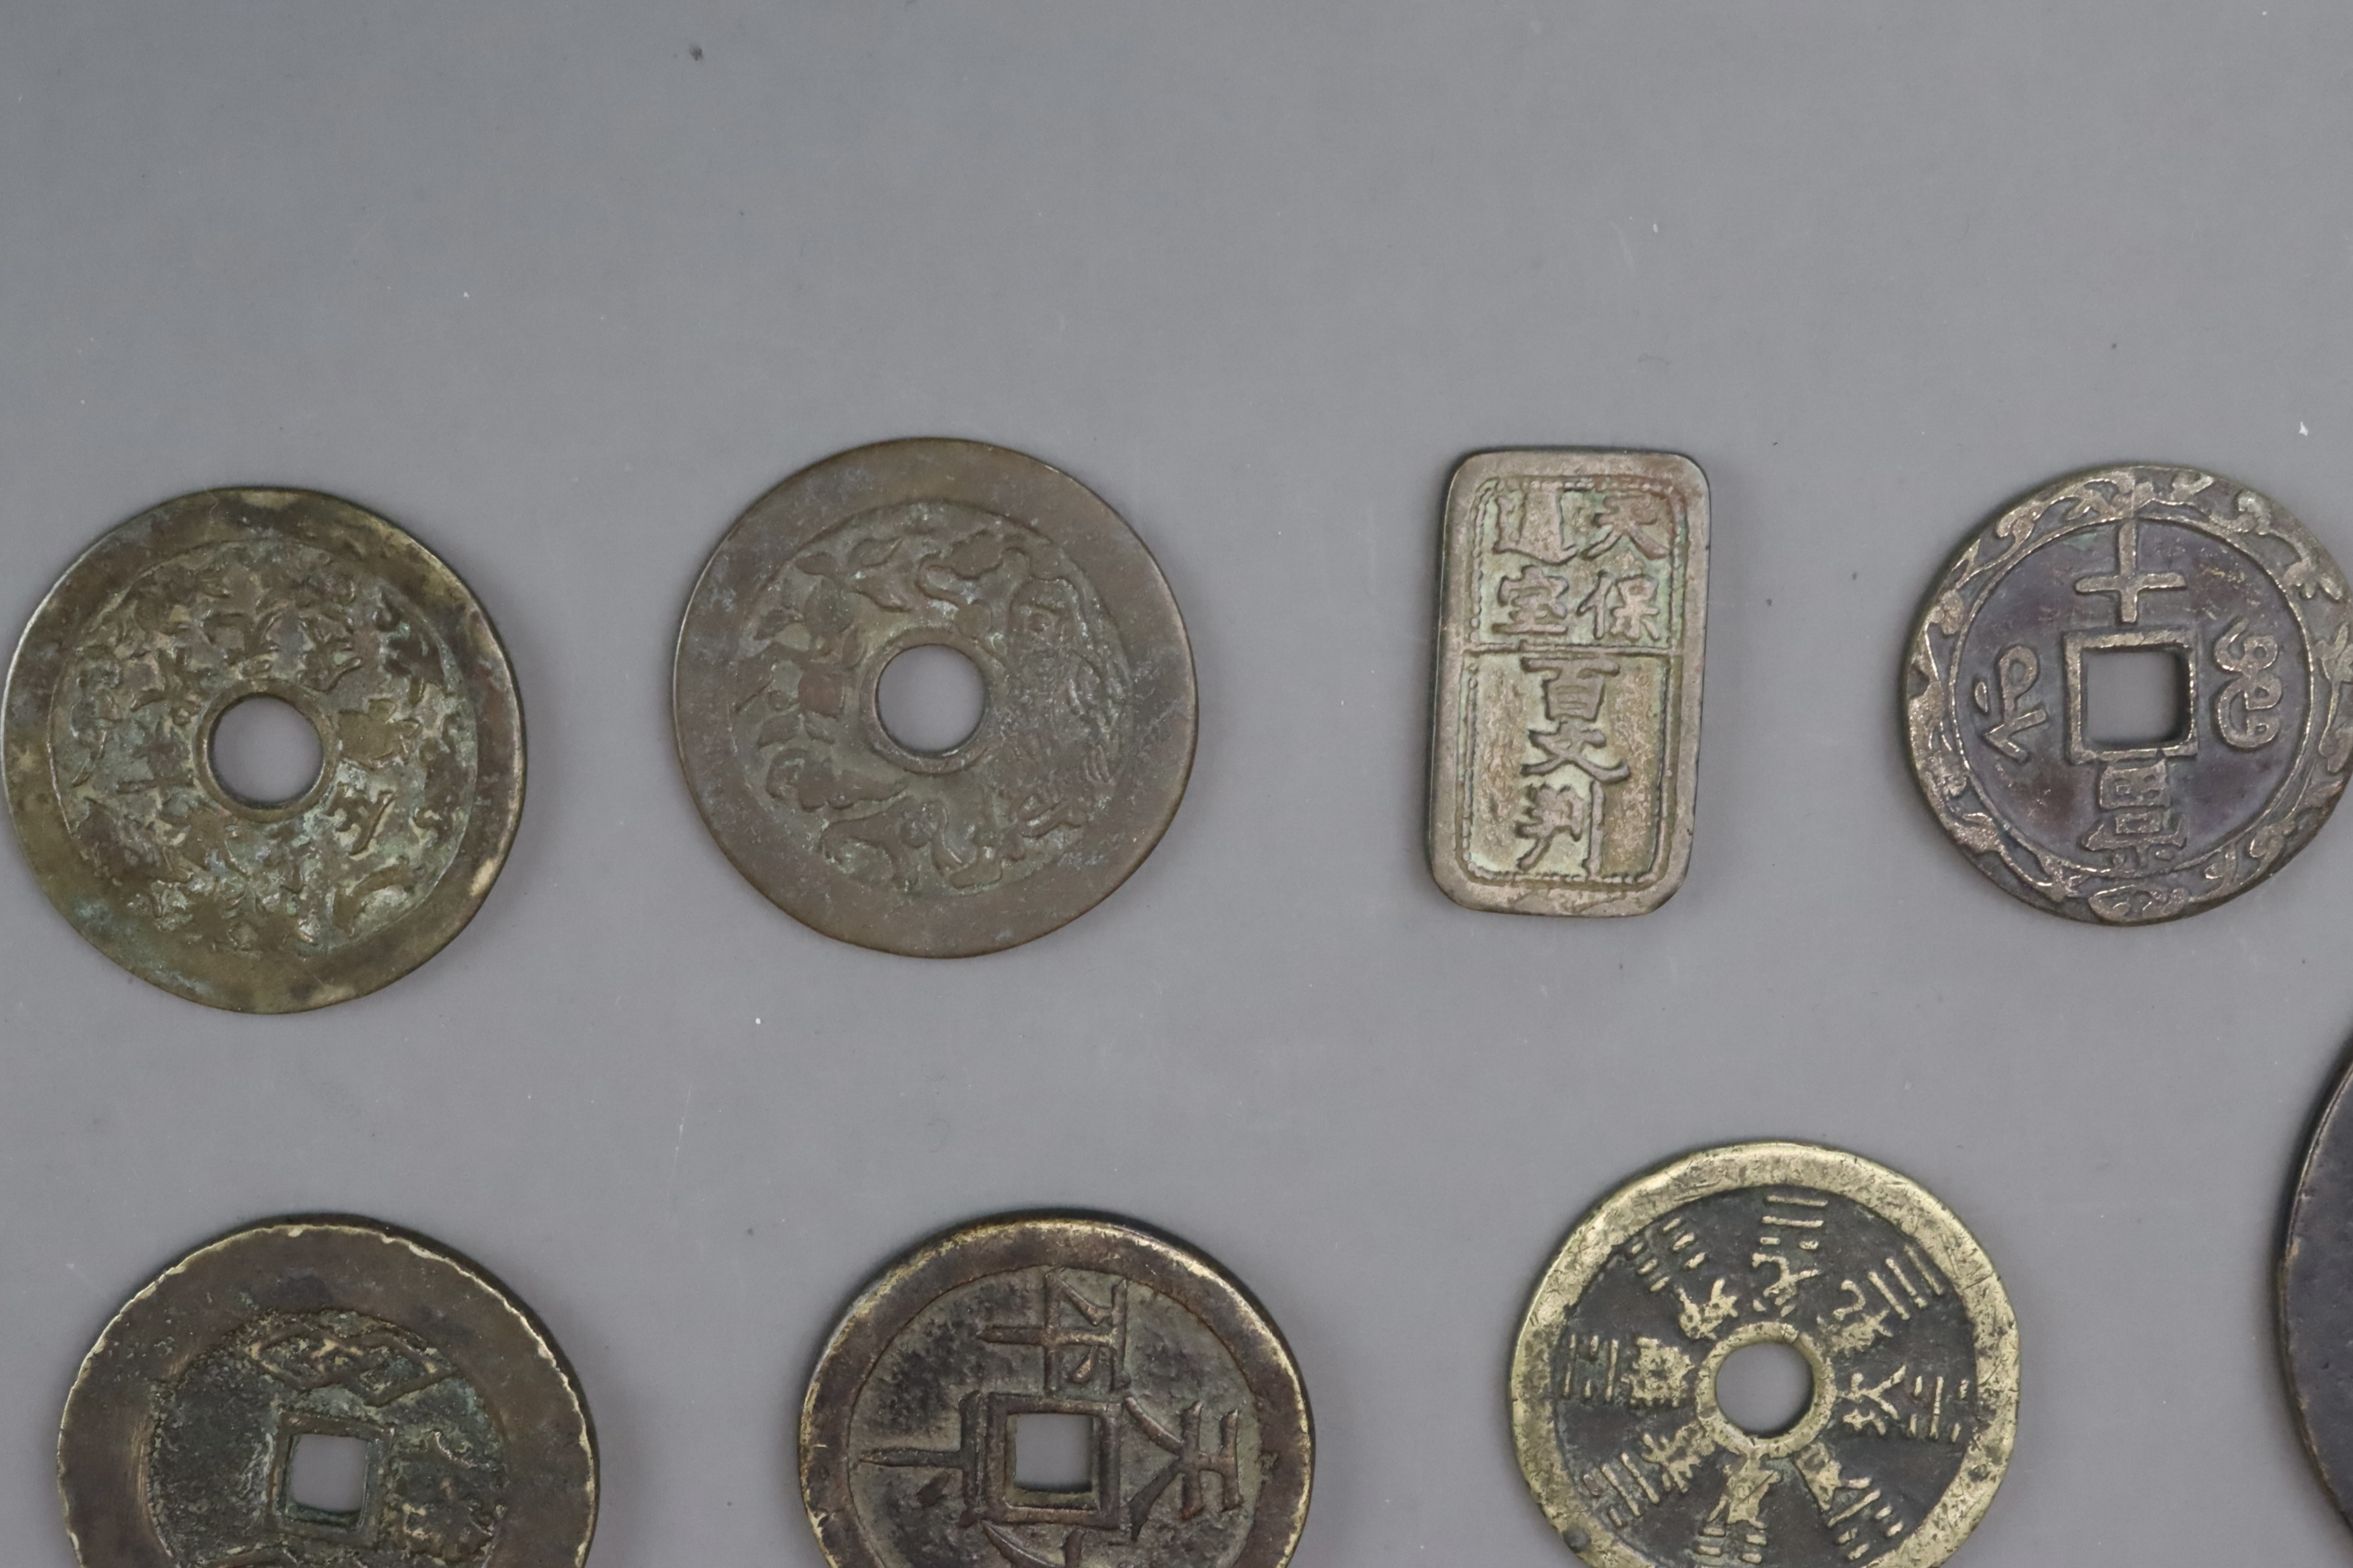 A Set of 12 Chinese Taoism Coins, Qing dynasty - Image 2 of 8